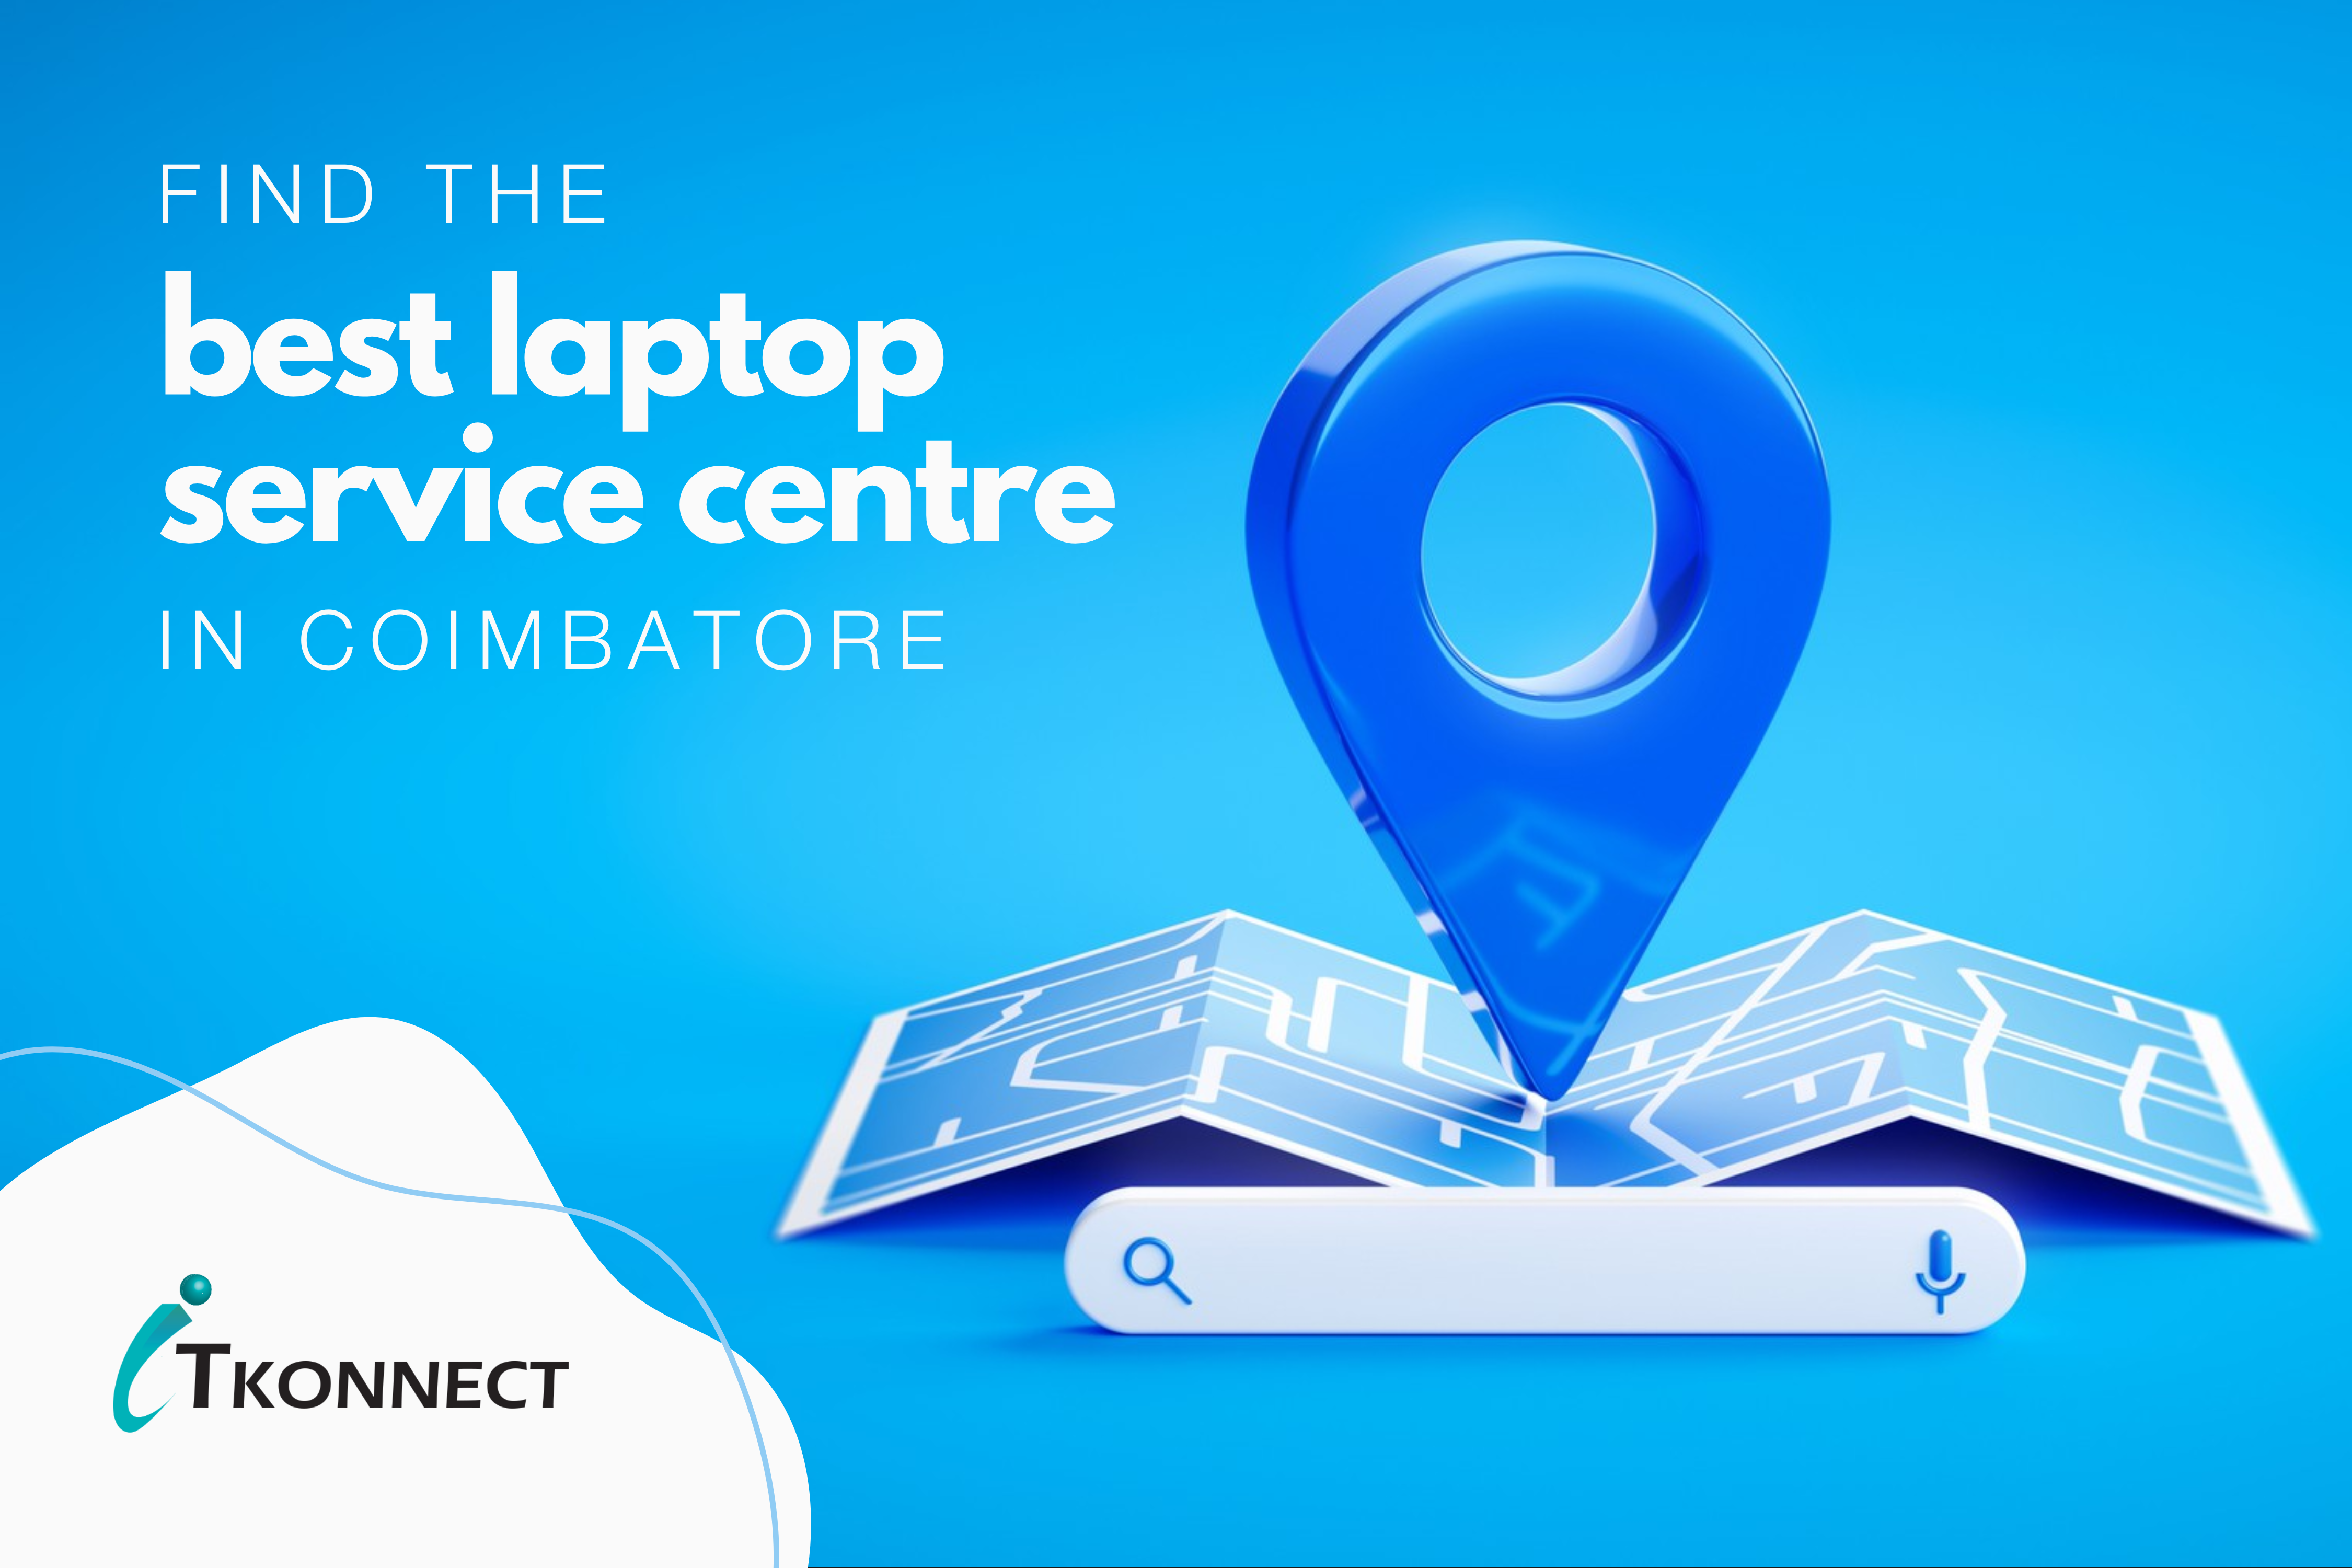 Find the best laptop service centre in Coimbatore